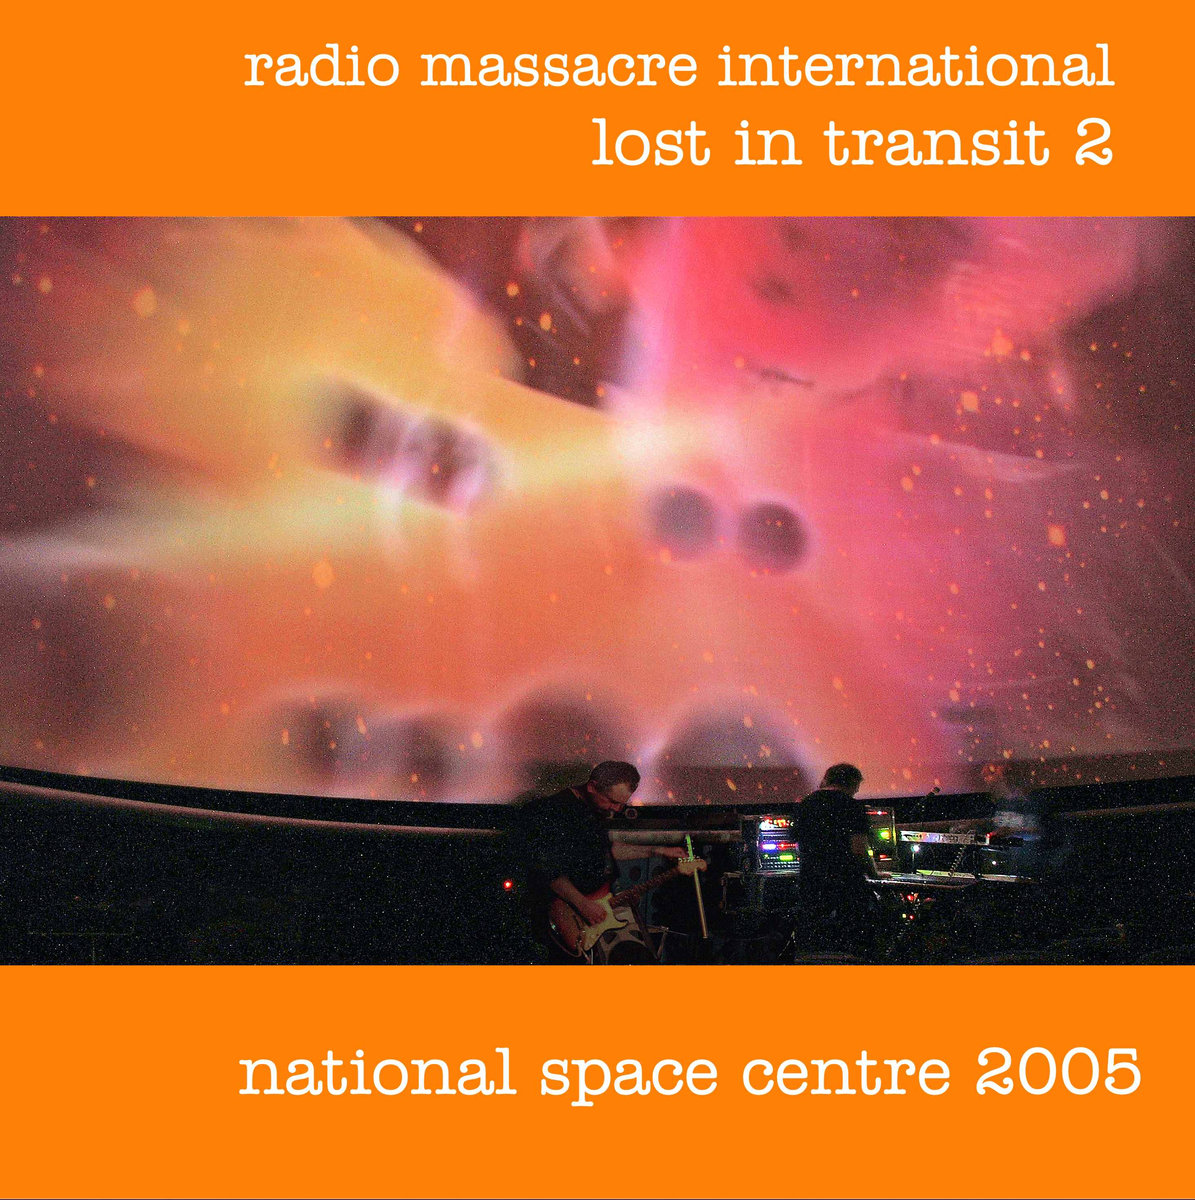 lost in transit 2: national space centre 2005